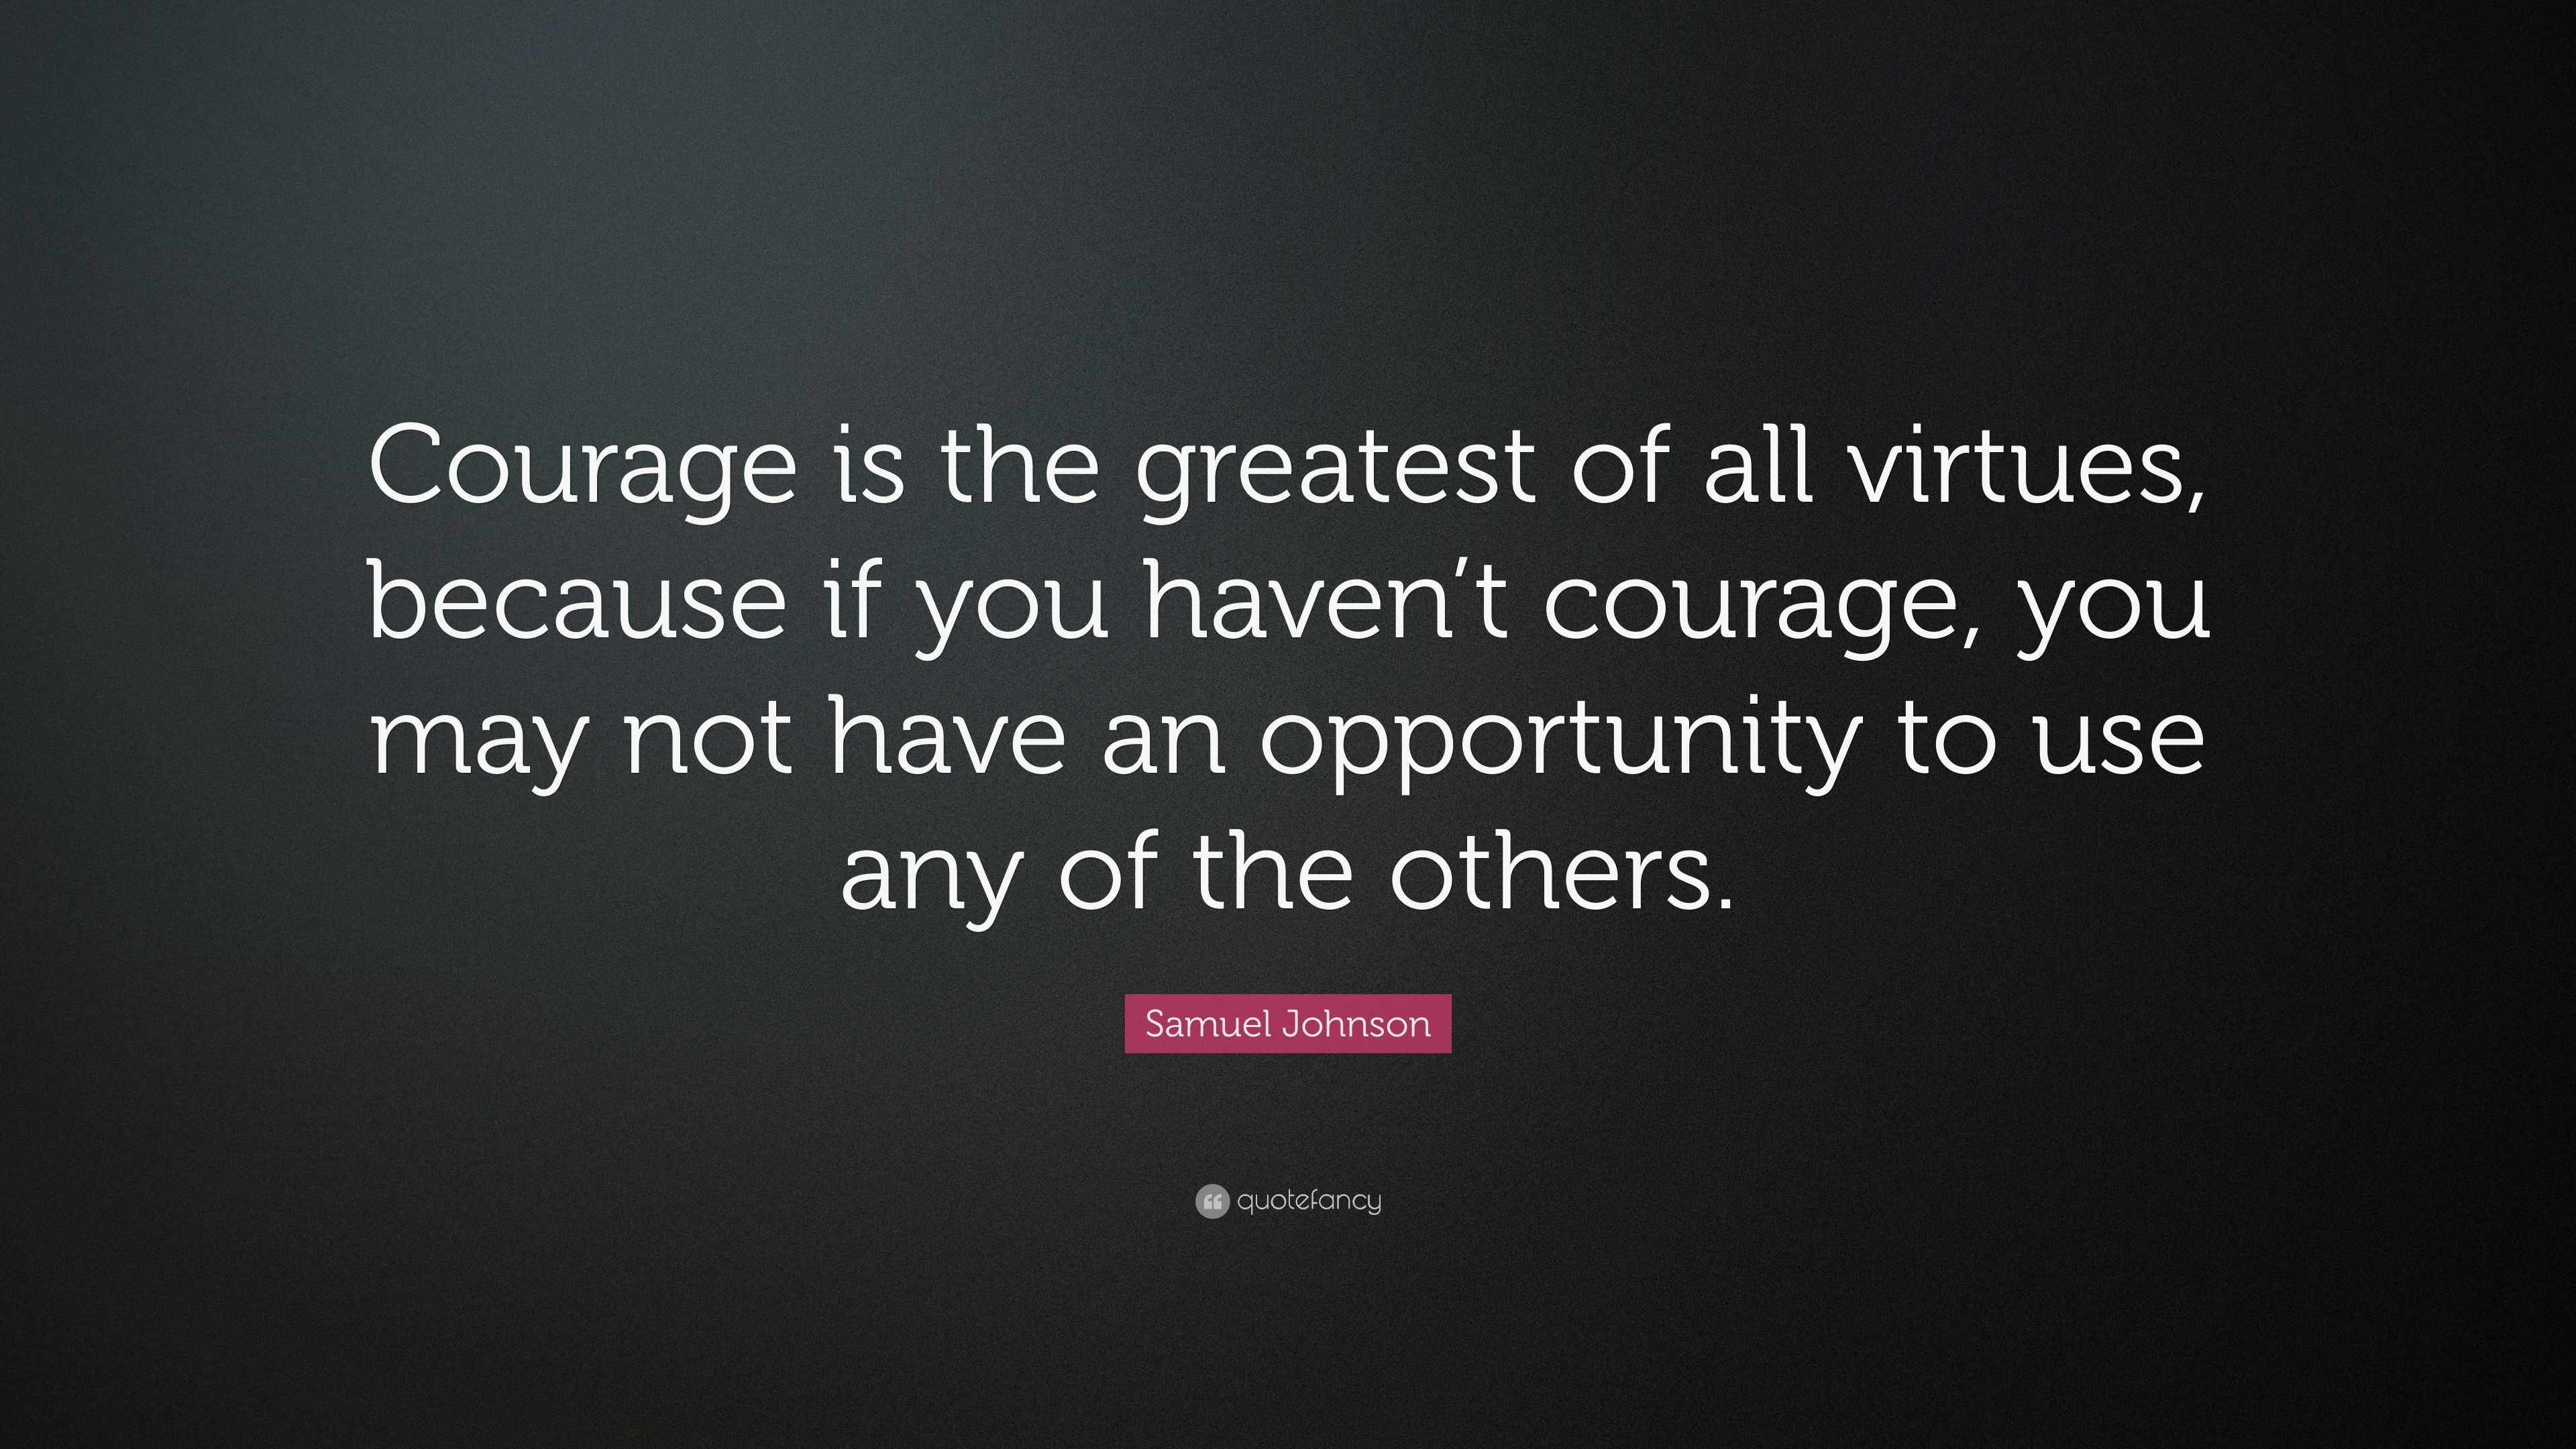 Samuel Johnson Quote: “Courage is the greatest of all virtues, because ...